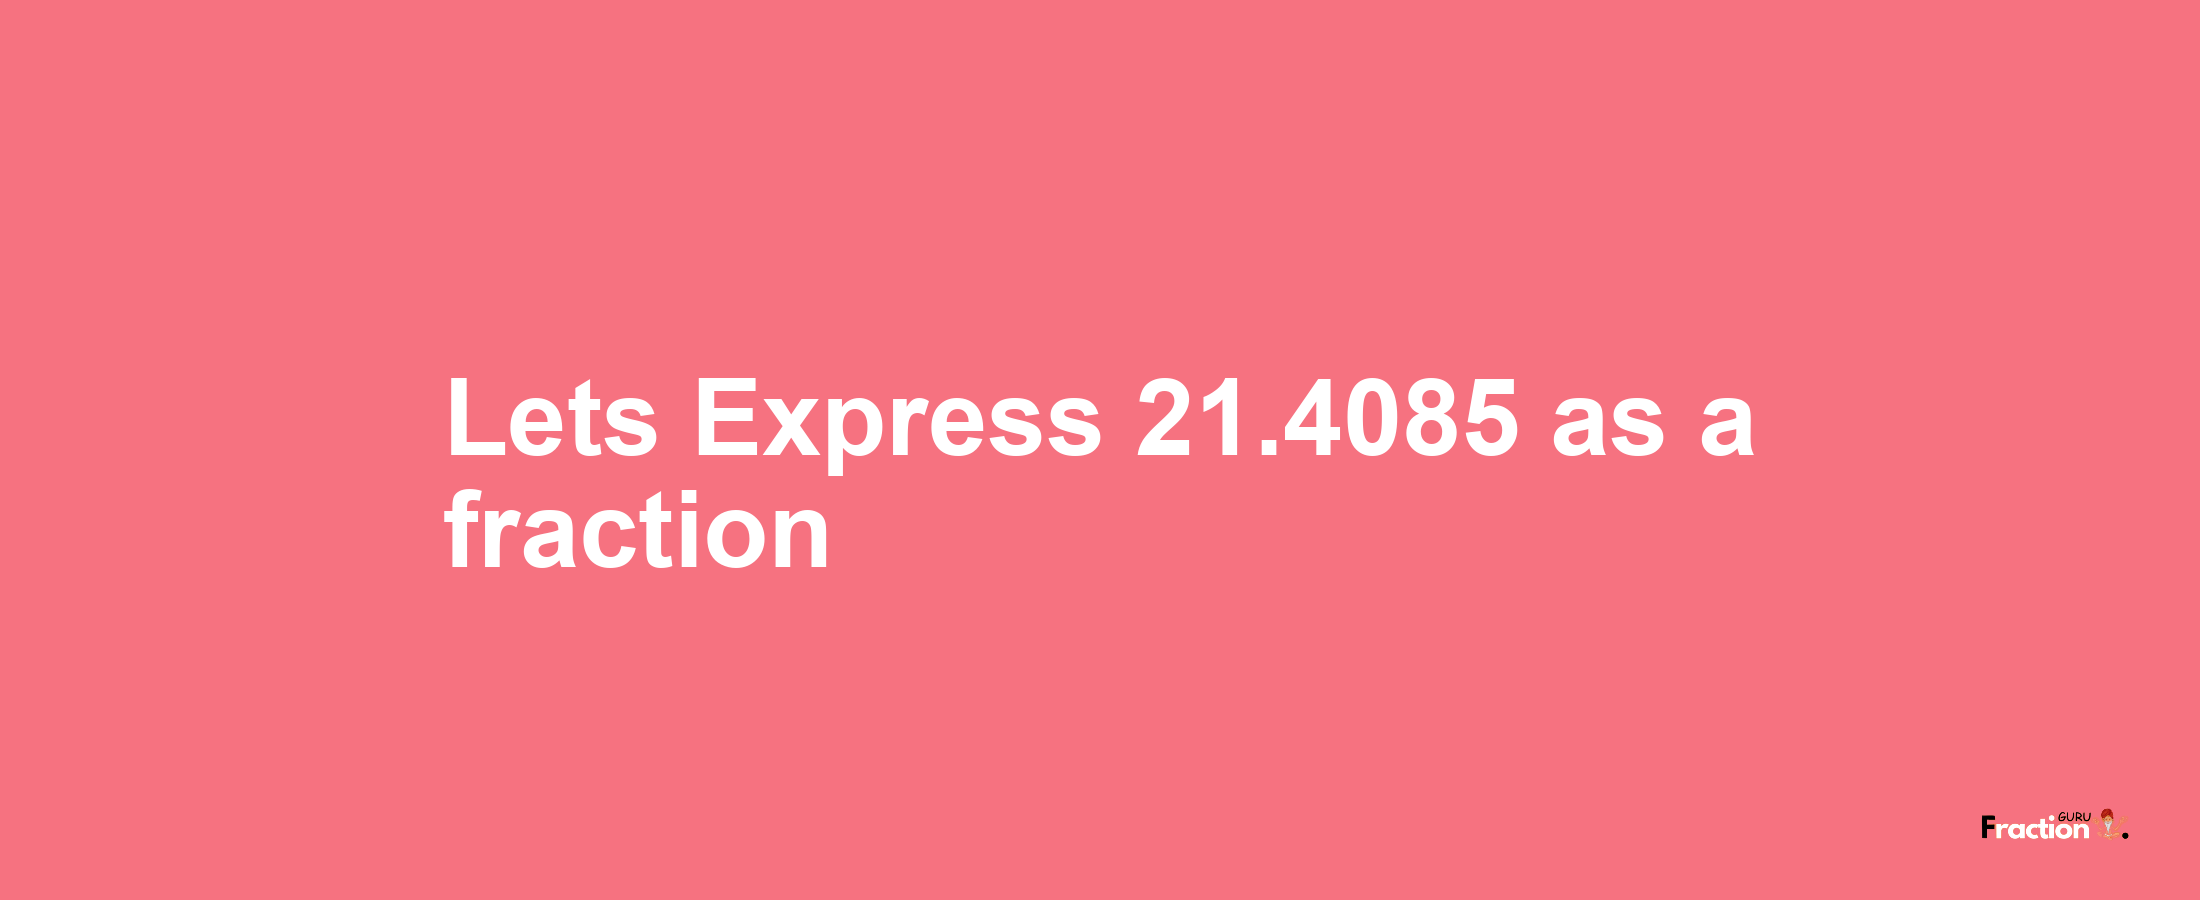 Lets Express 21.4085 as afraction